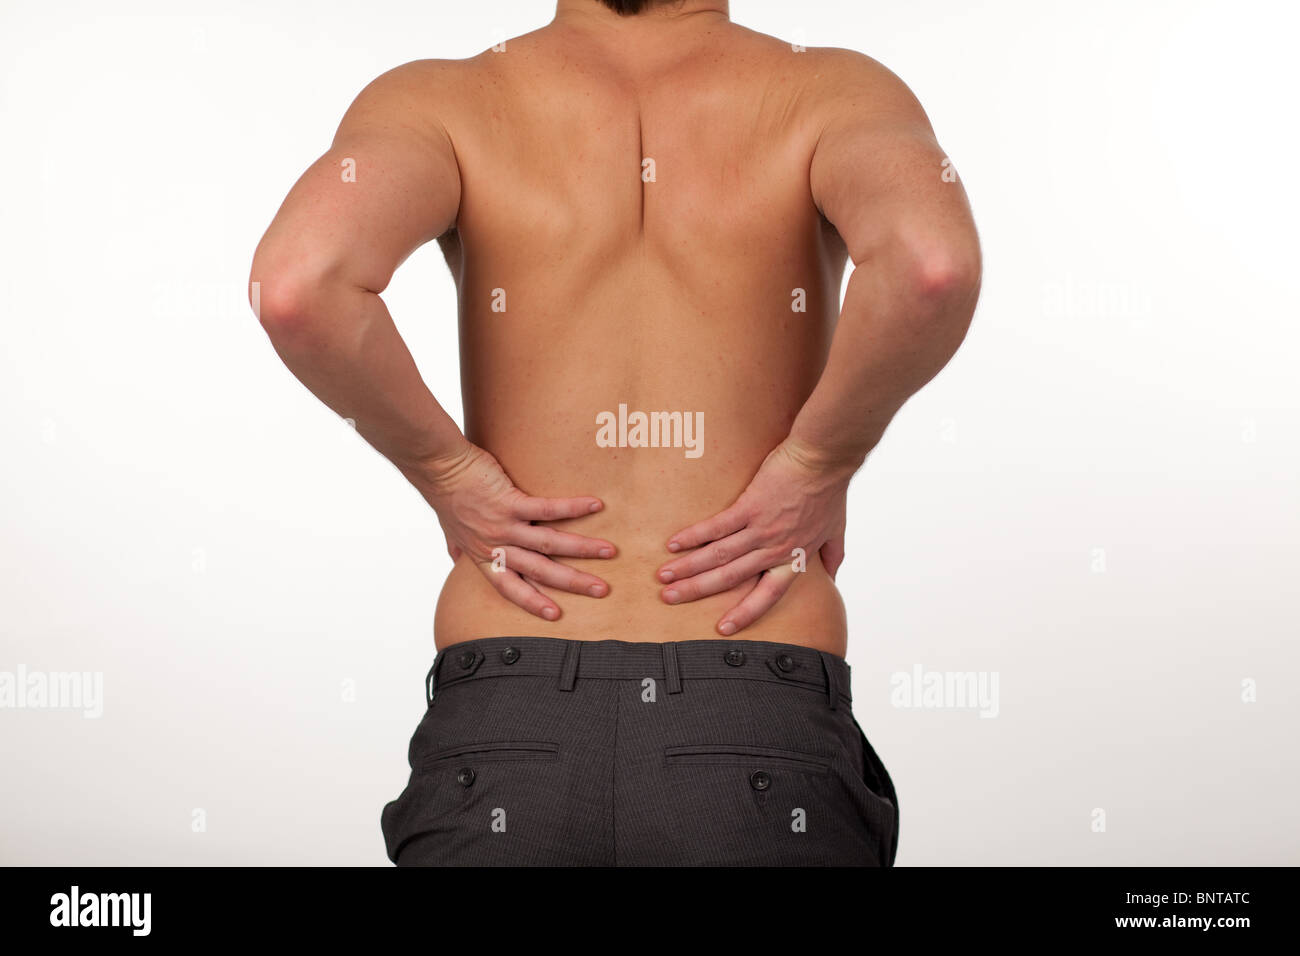 Man with backpain isolated agasint white Stock Photo